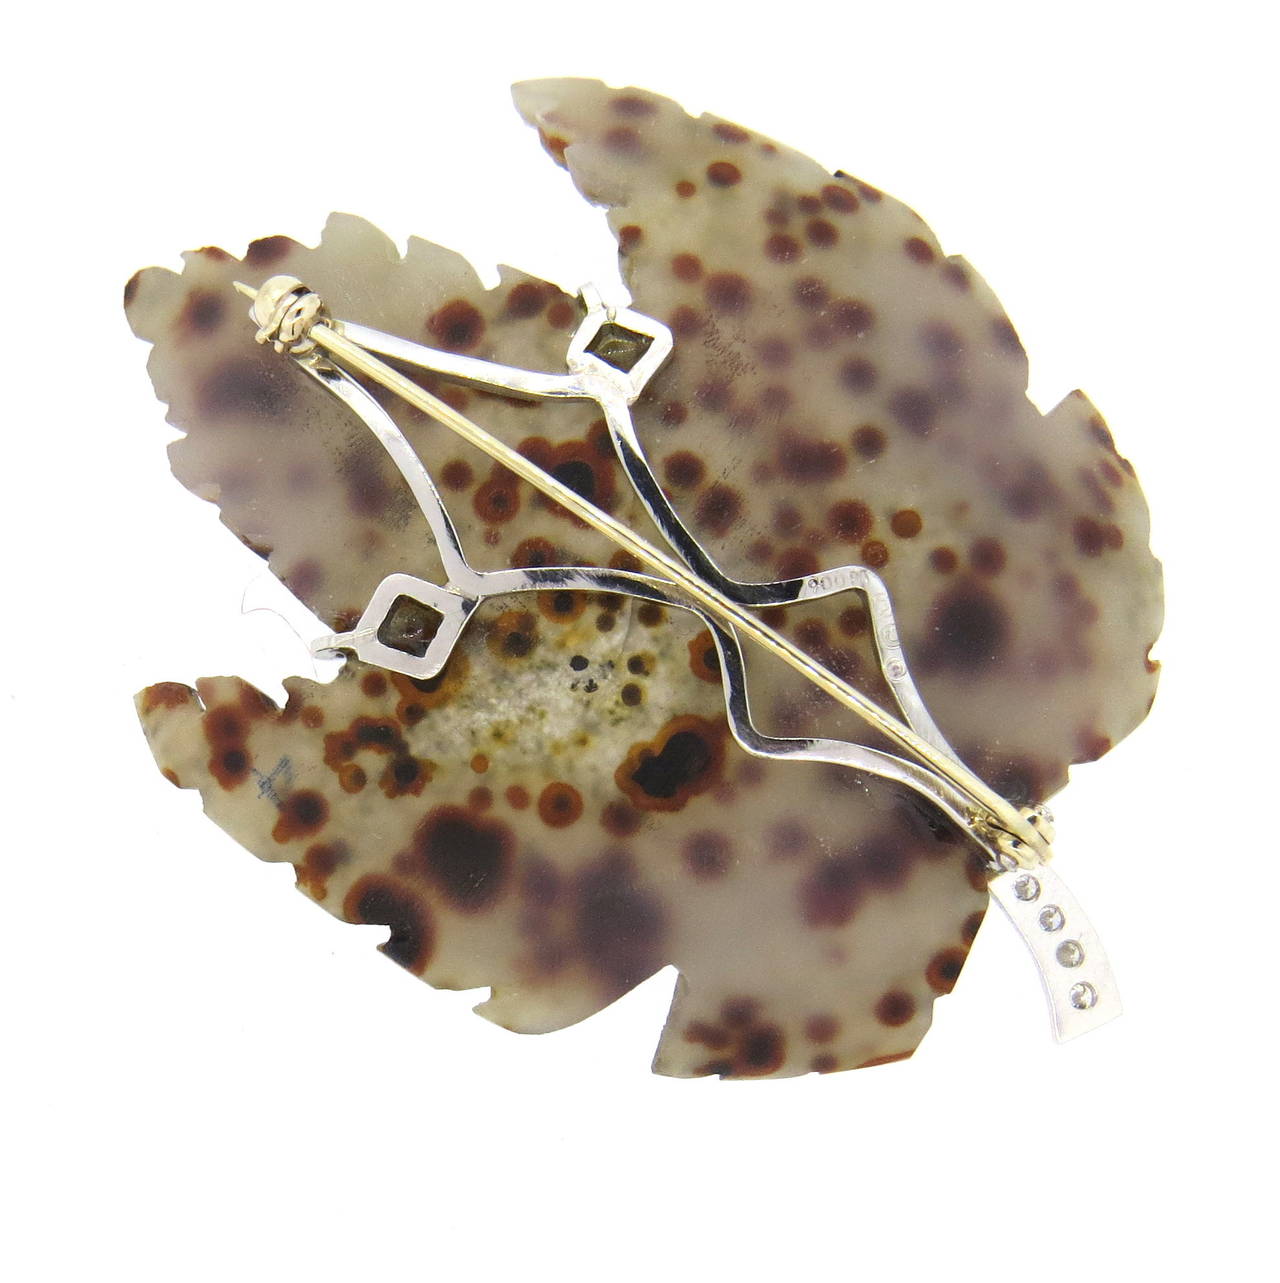 Delicate platinum leaf brooch, designed by Cathy Waterman, featuring carved druzy agate top, decorated with diamonds. Brooch is 60mm x 44mm. Marked with makers hallmark and 900pt. Weight of the piece - 16.7 grams